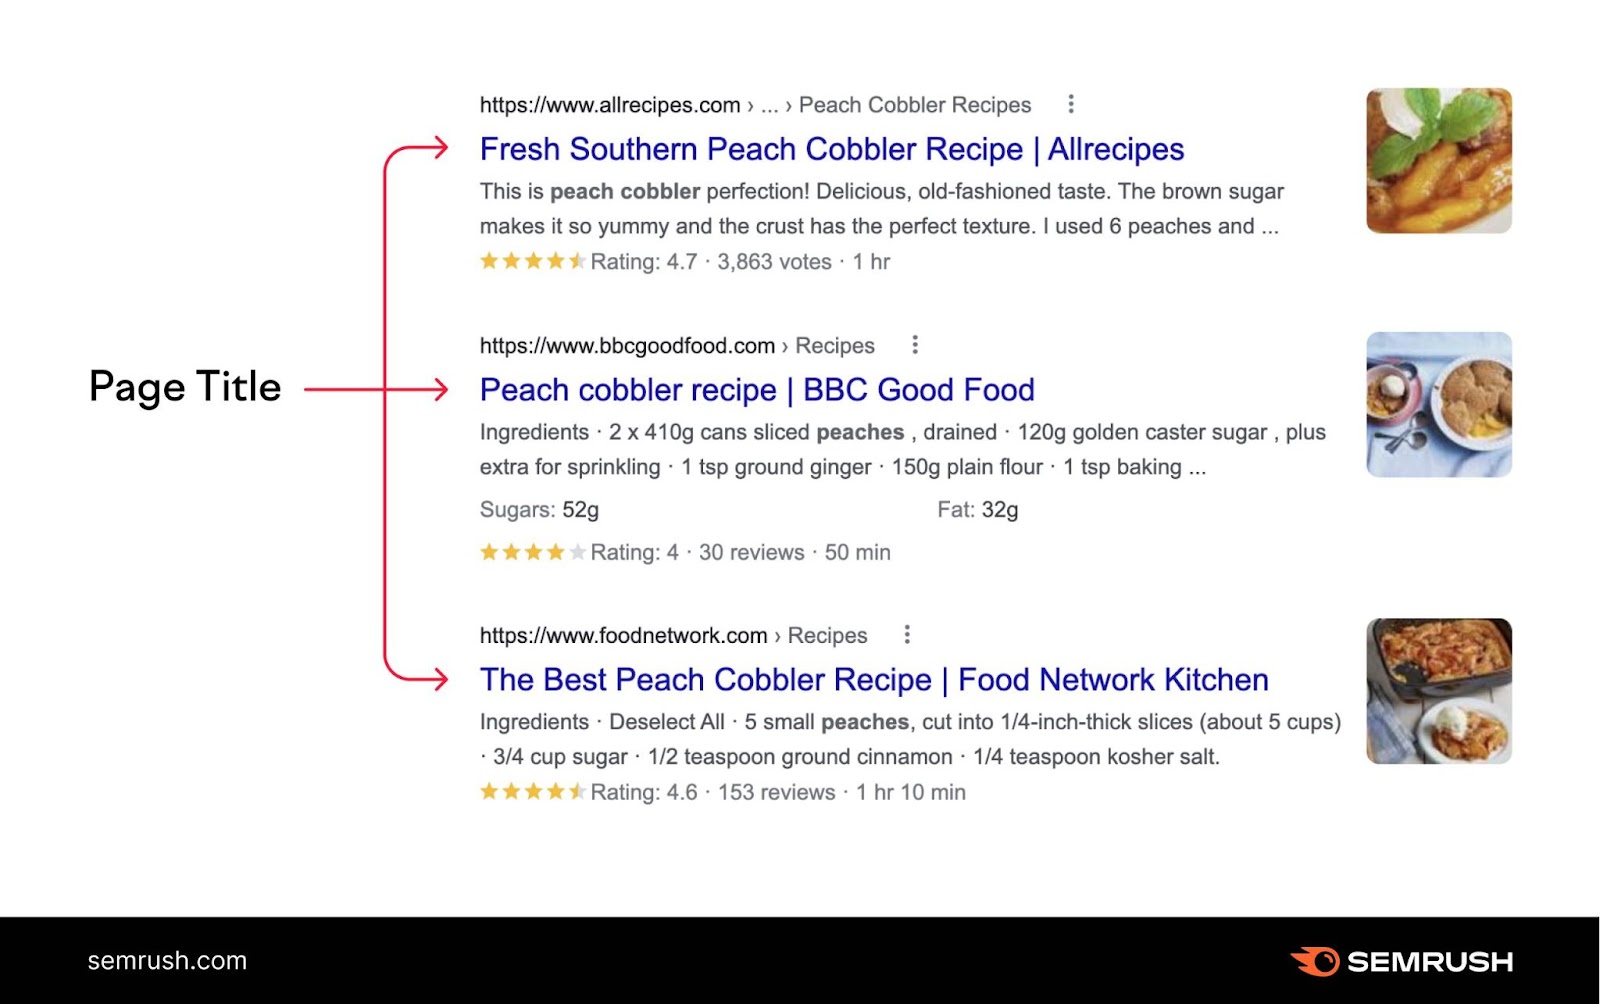 title tag examples in google serp such as Peach cobbler recipe from BBC Good Food